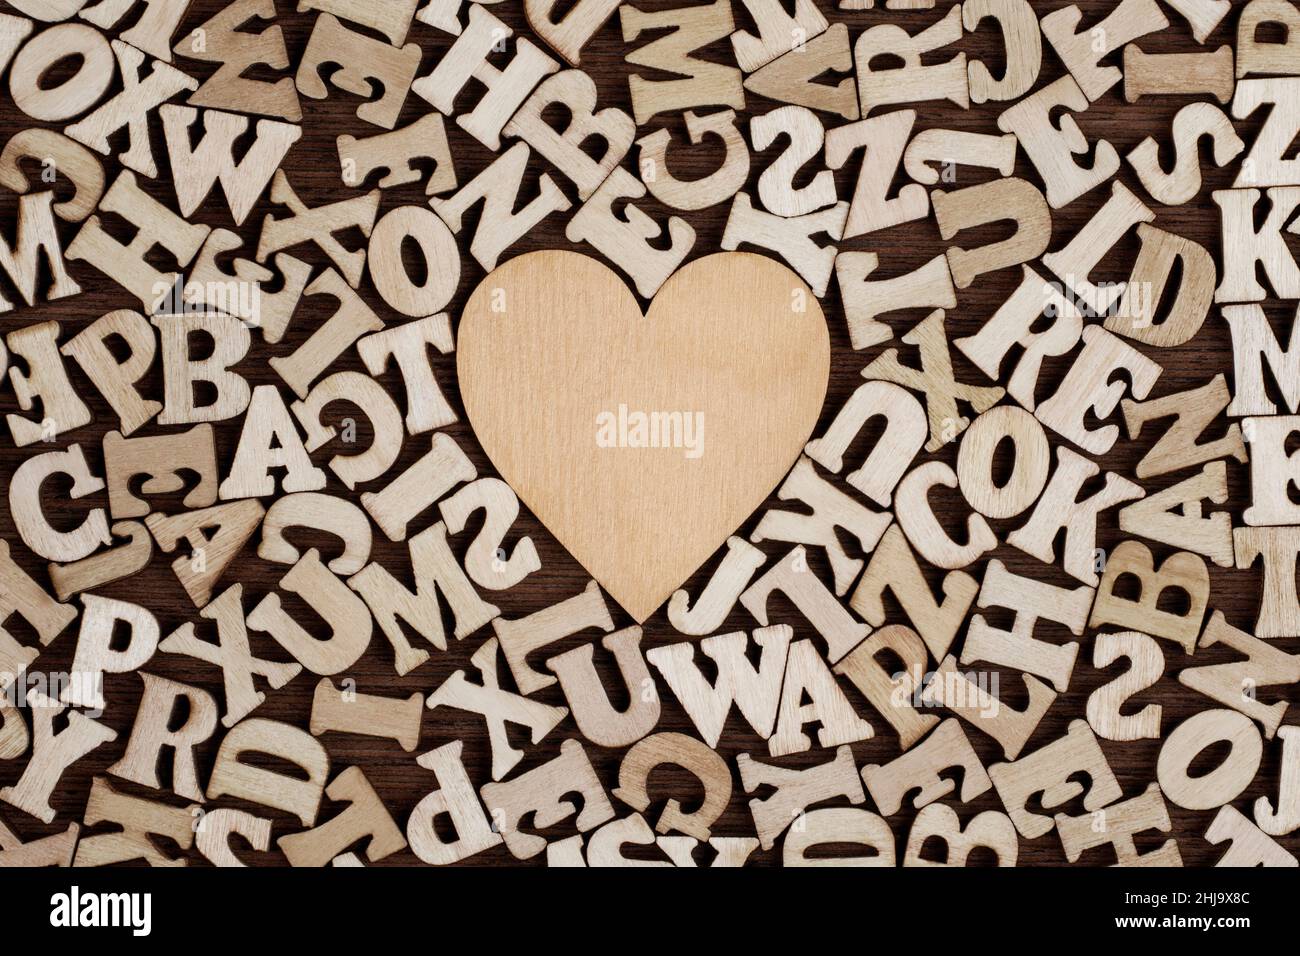 Vintage Wooden Heart Surrounded by Wooden Letters Background. Stock Photo